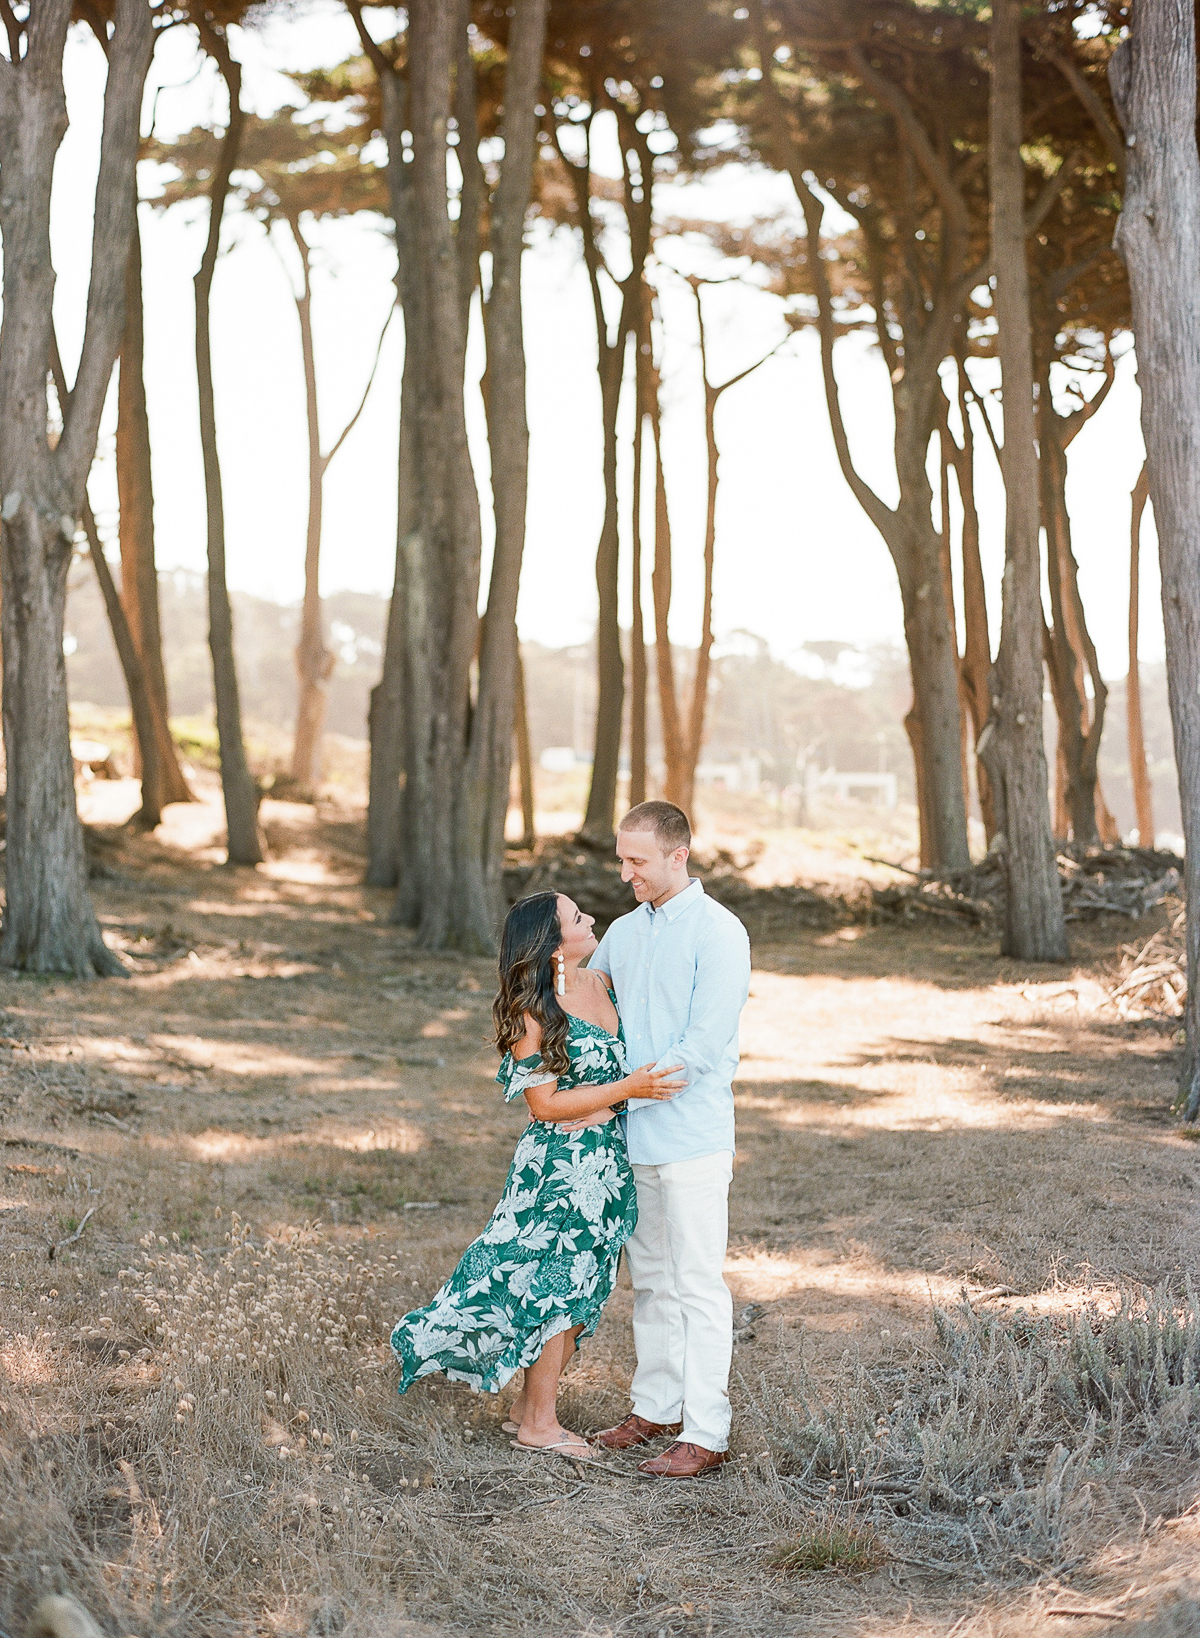 Castello di Amorosa Engagement Session in Napa The Ganeys01